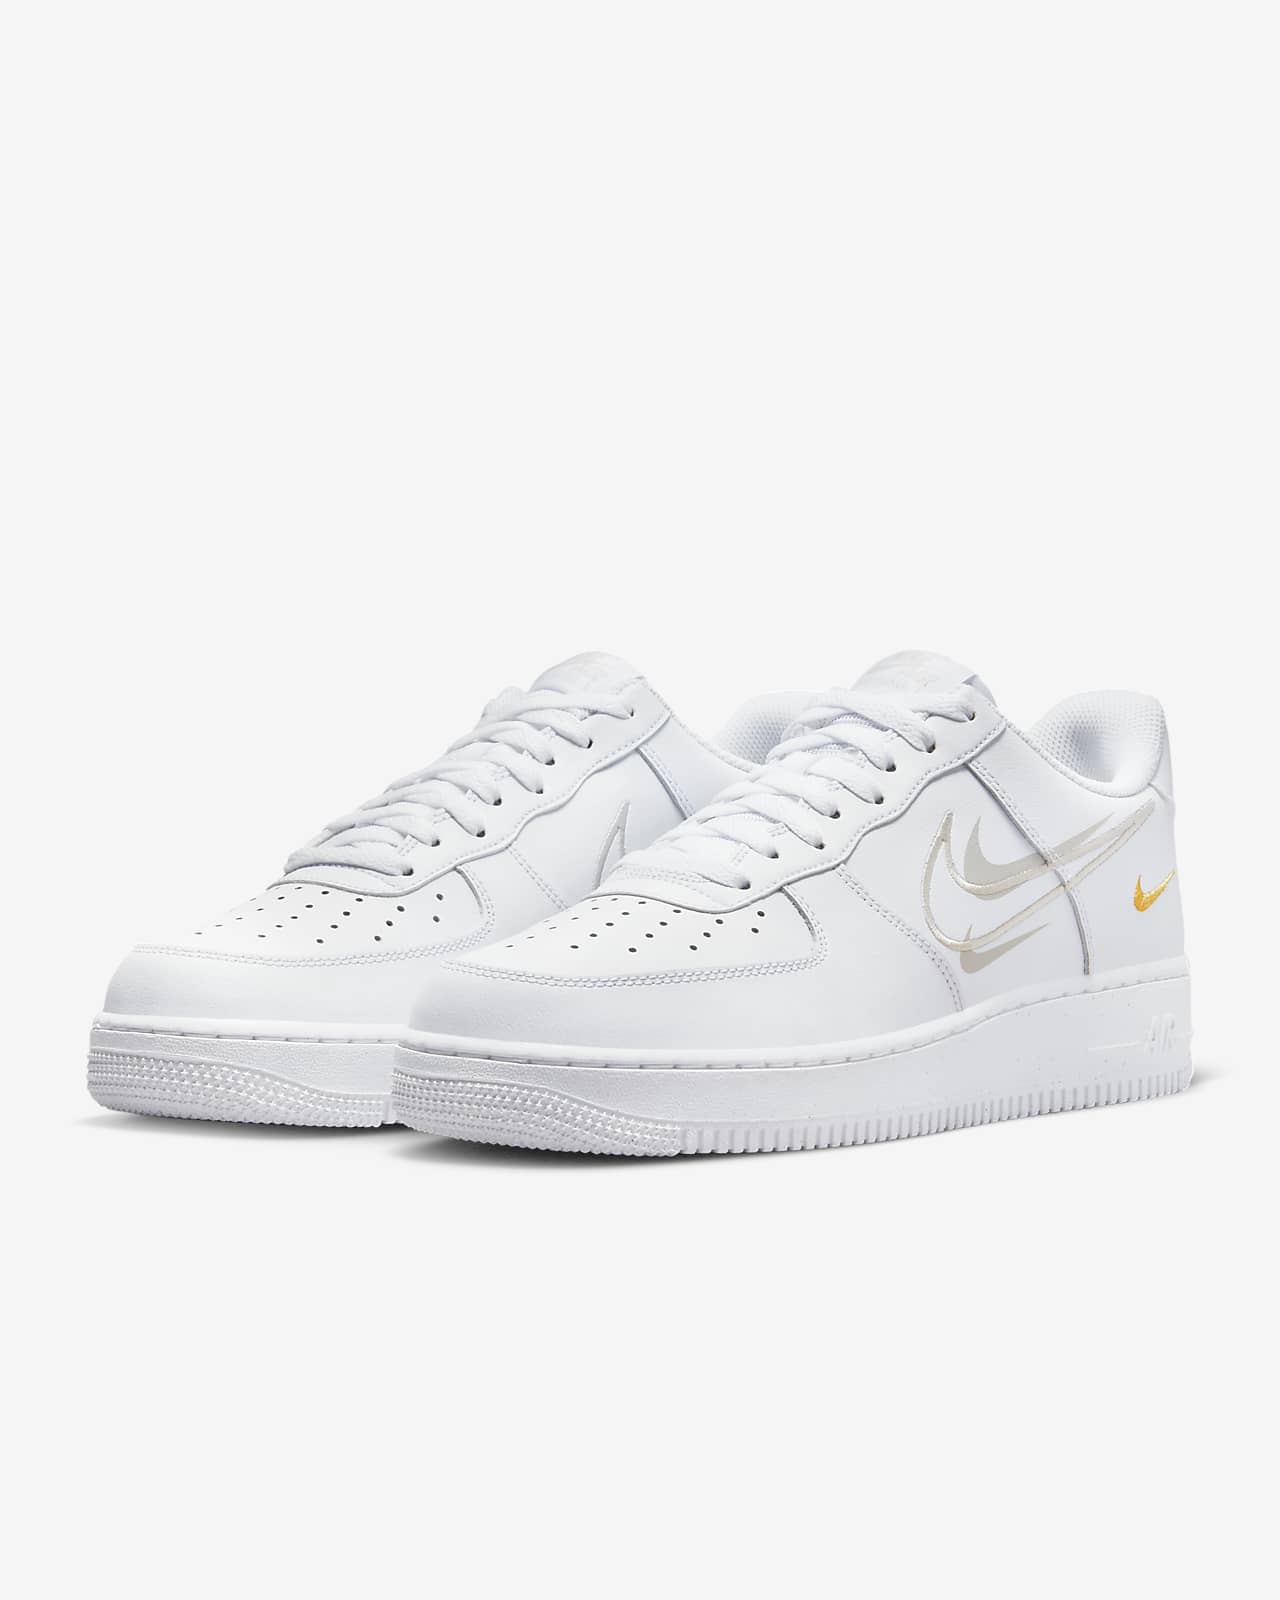 Nike Air Force air force 1 07 1 '07 Men's Shoes